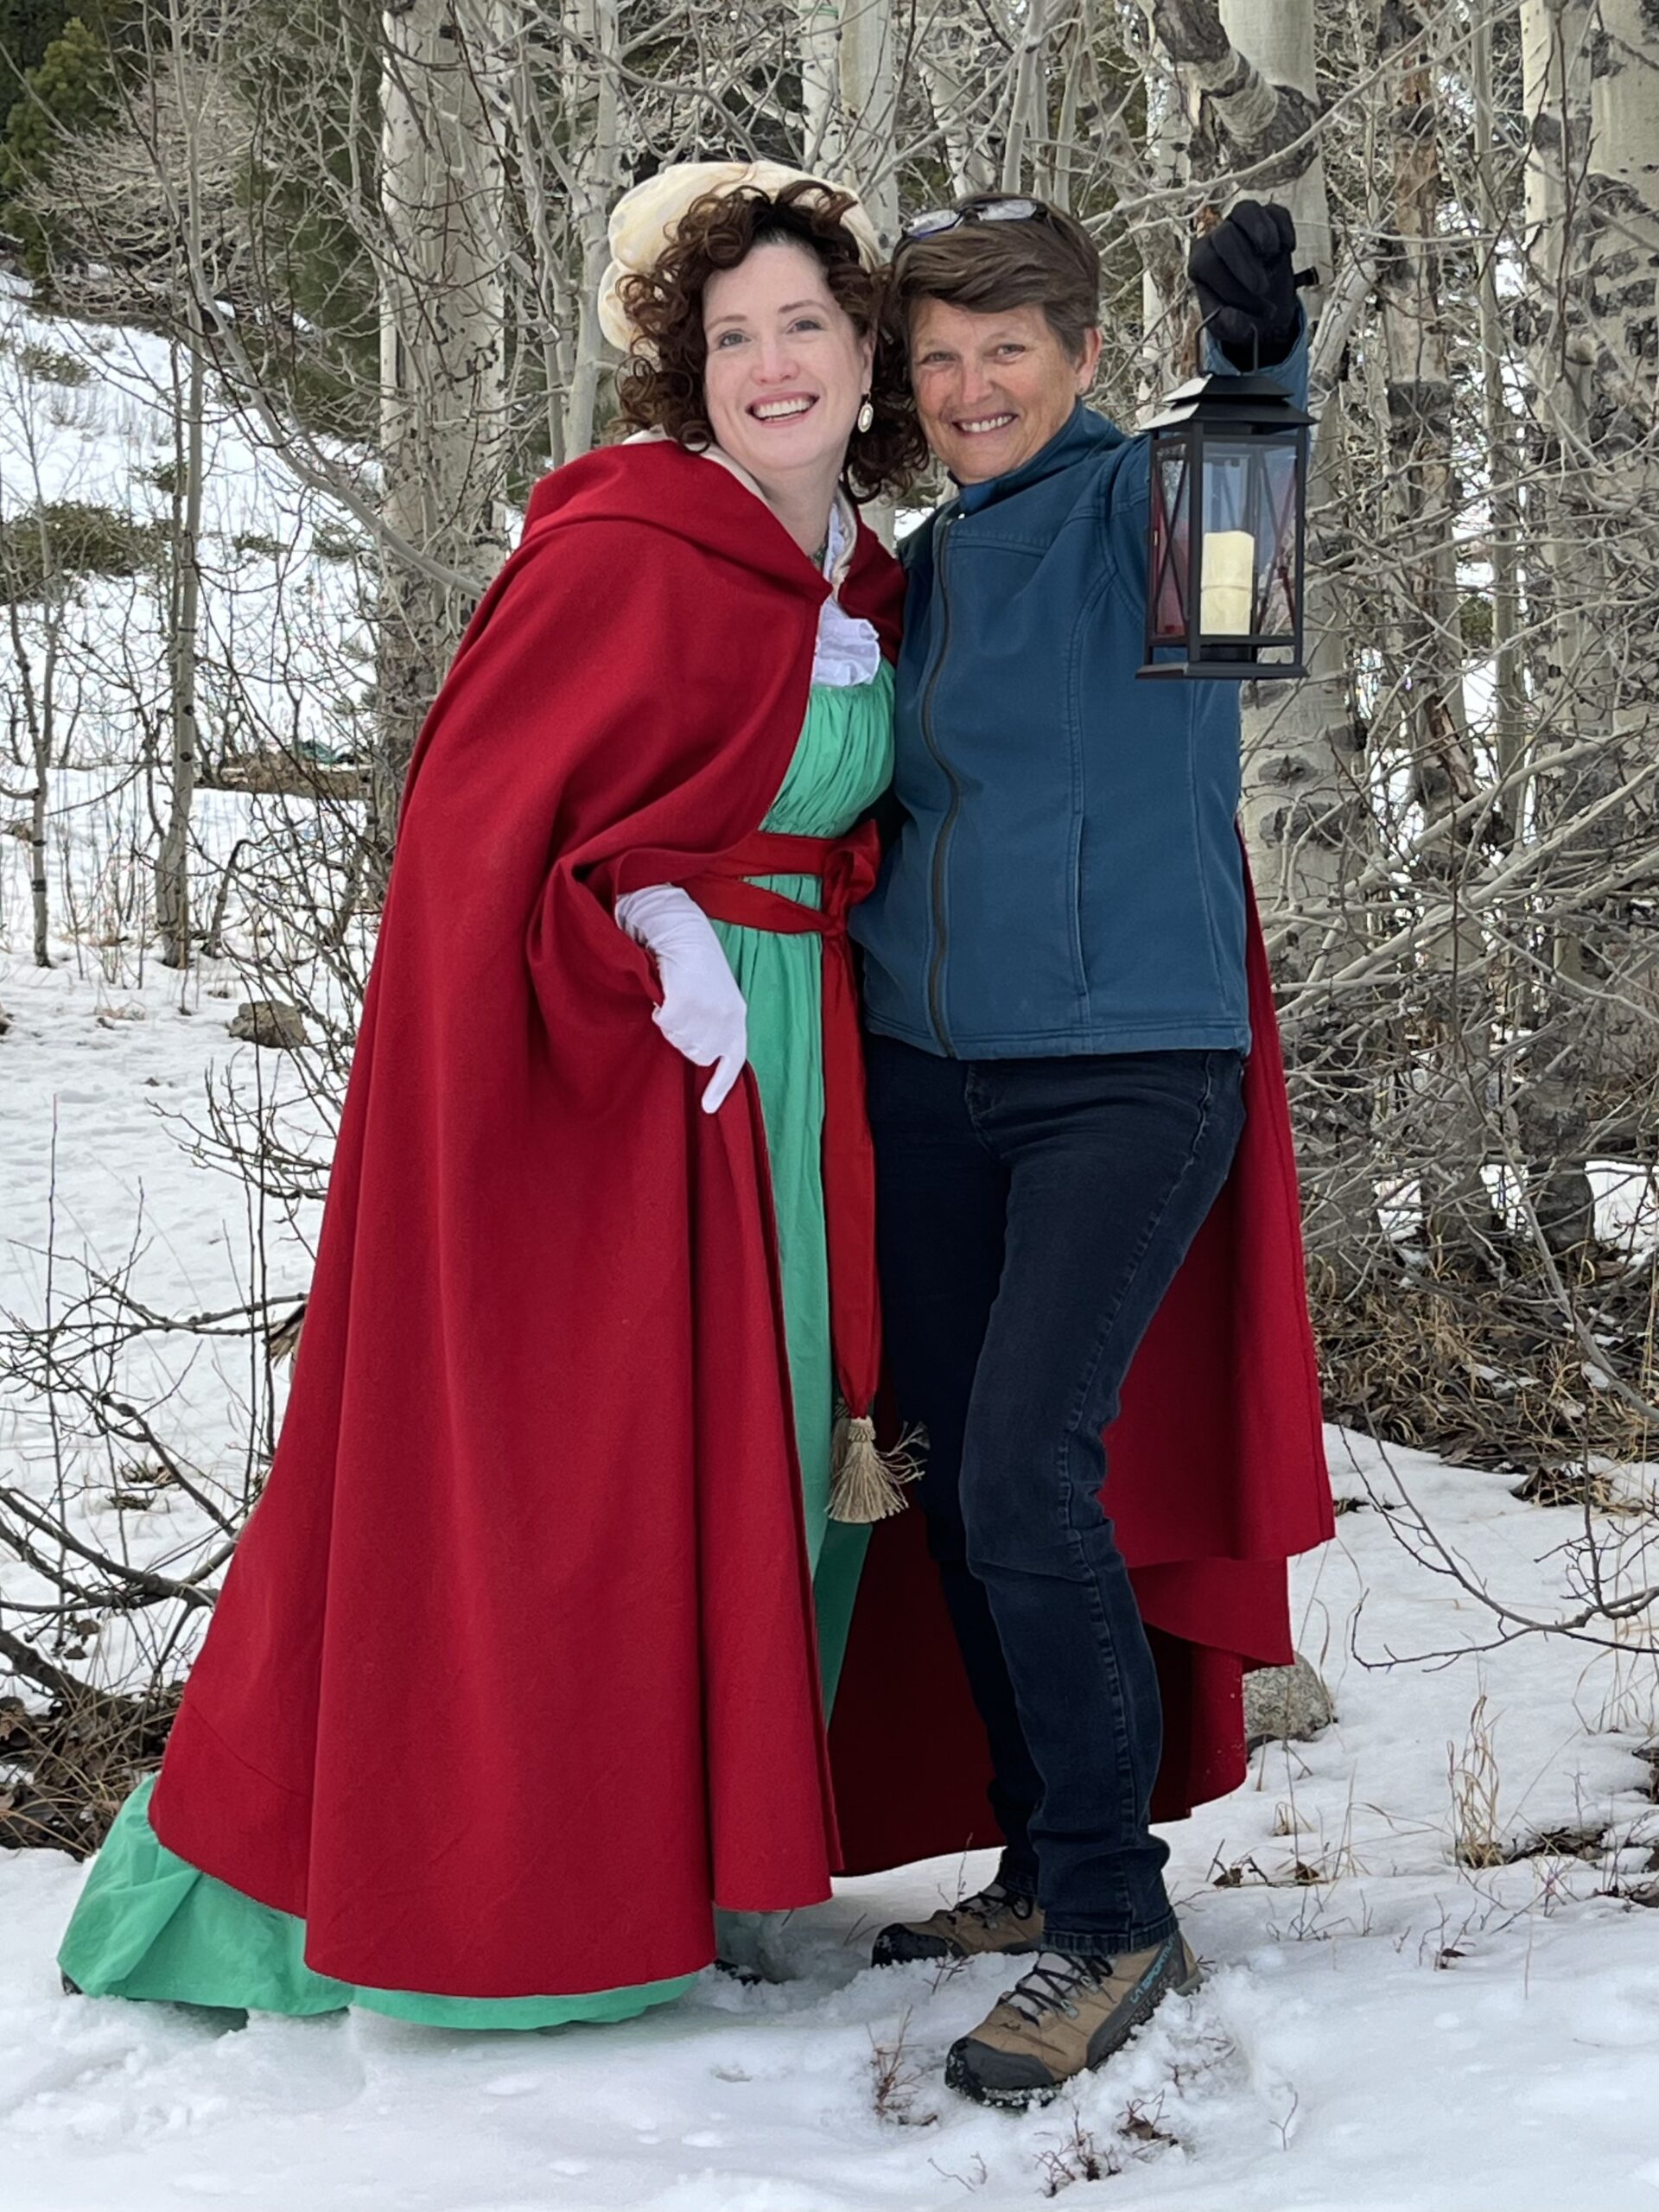 Tabubilgirl, wearing a long red cardinal cloak, stands with a woman wearing a modern blue snow jacket and black jeans. The woman is holding a lantern.